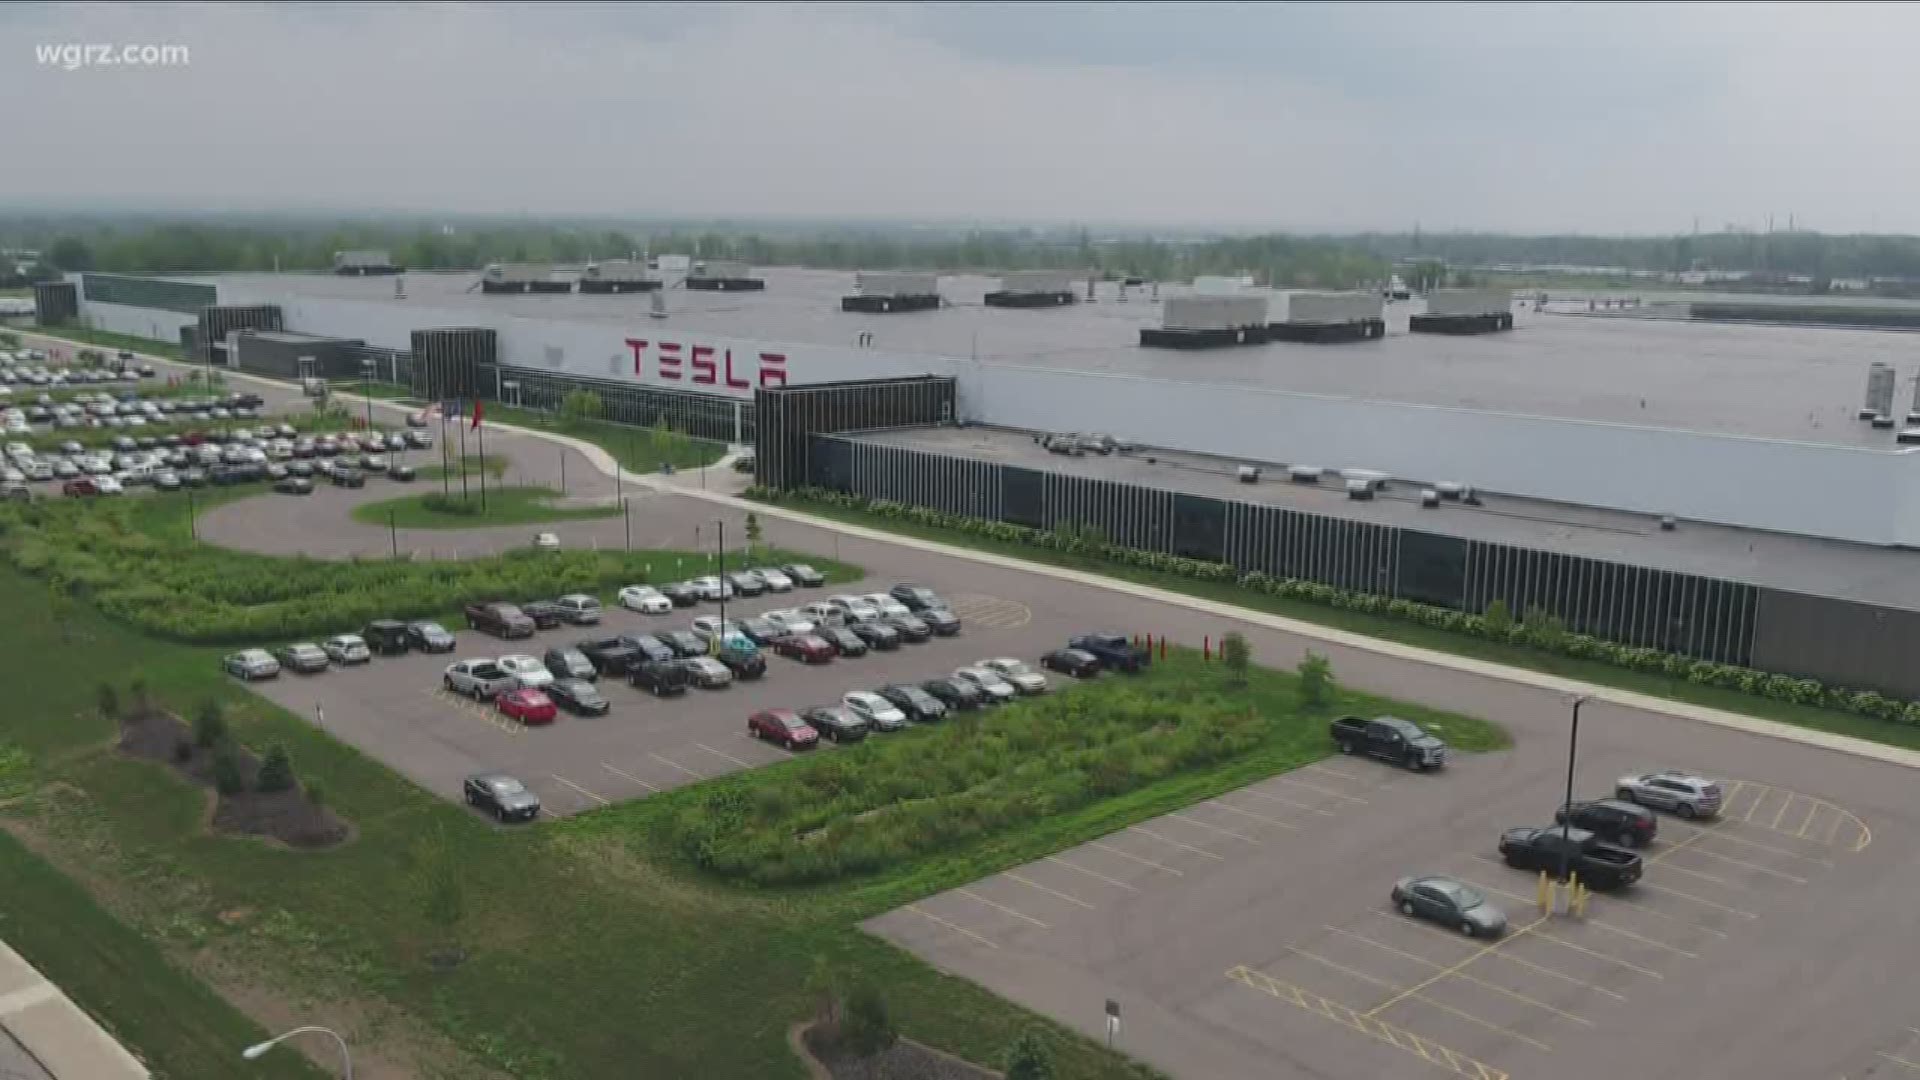 Tesla's adding production lines at the factory and had to make room by moving out other "unused" equipment.